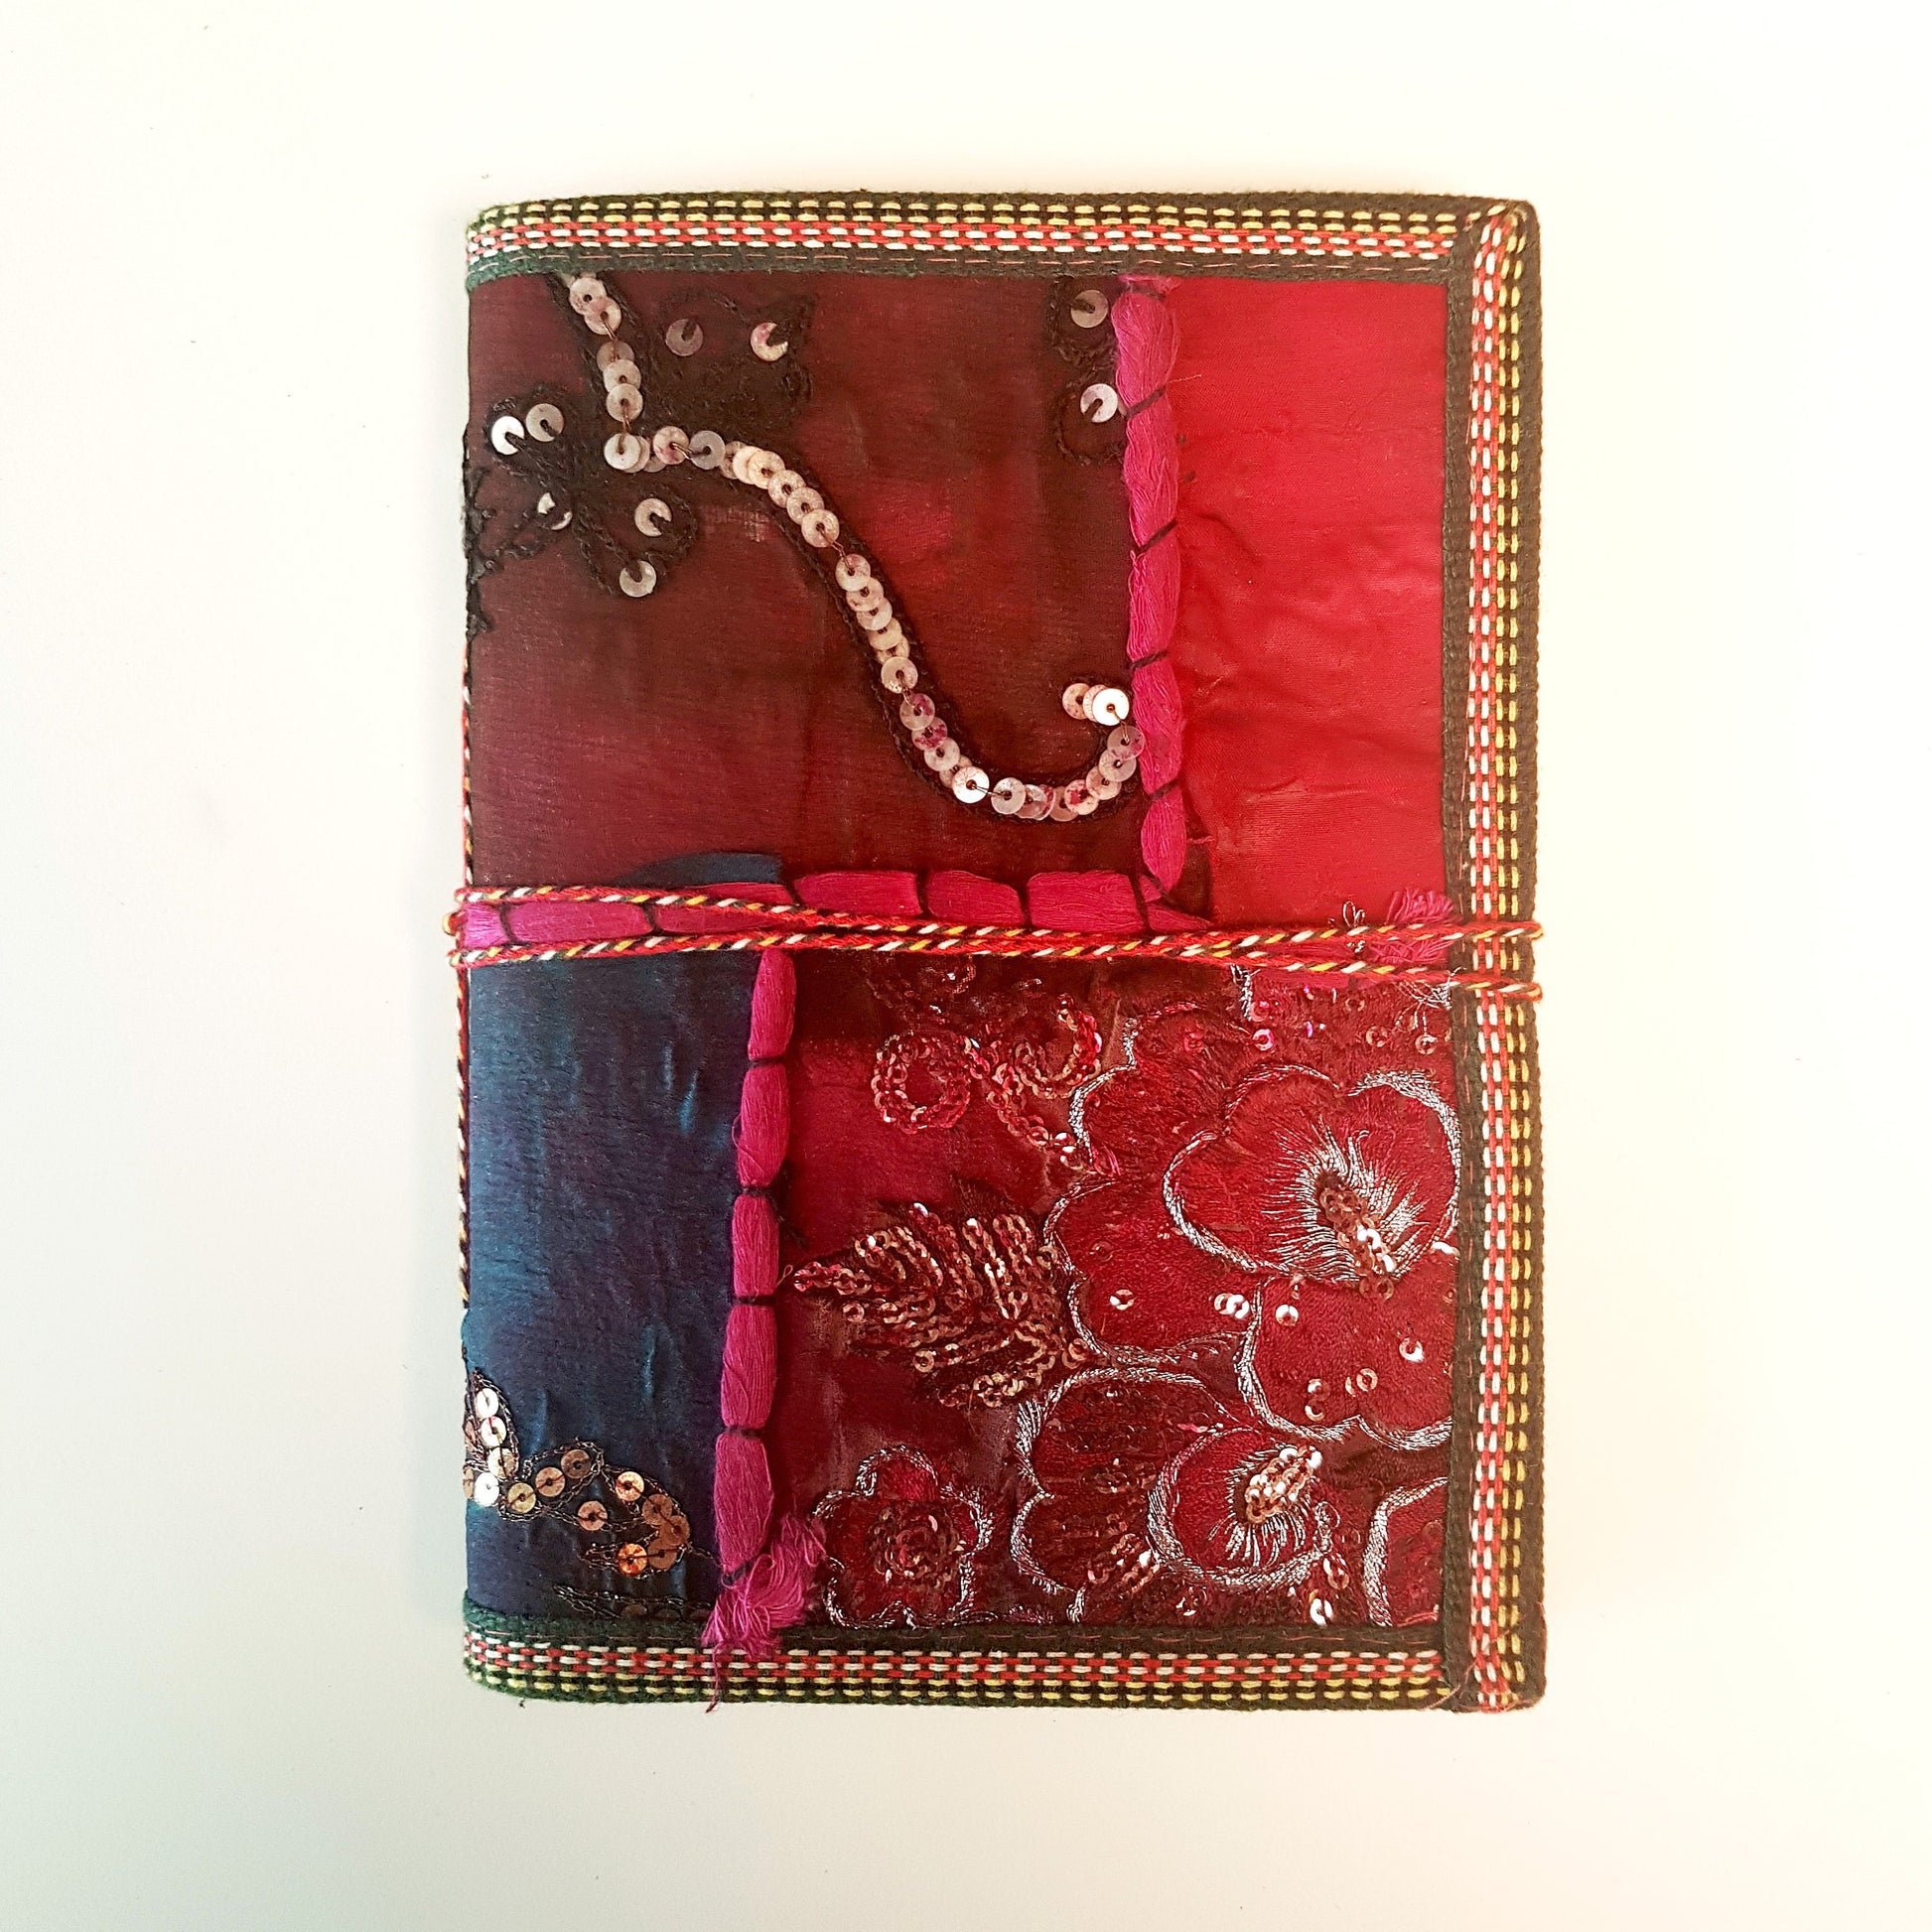 Vintage textile art journal  6 x 8 inch blank book. One of kind handmade notebook diary with a unique beaded jewelled fabric collage cover. - Vintage India Ca